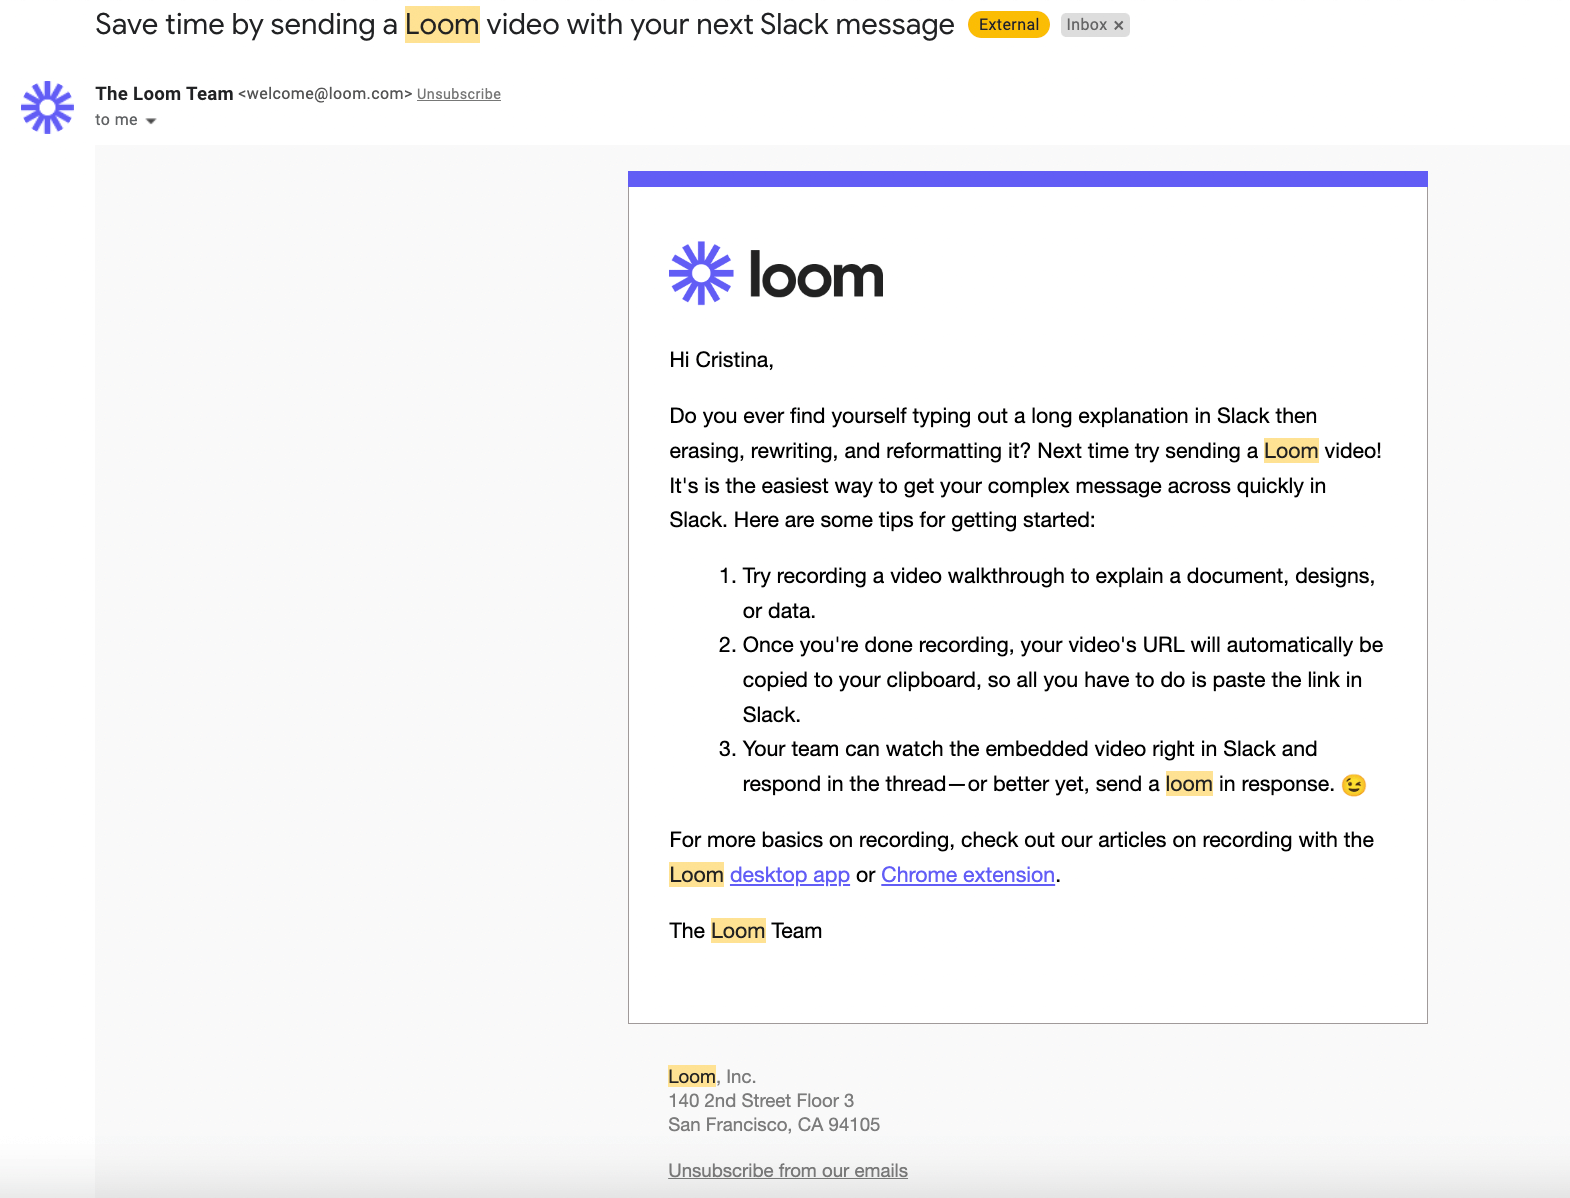 SaaS Welcome Email: Welcome email from Loom